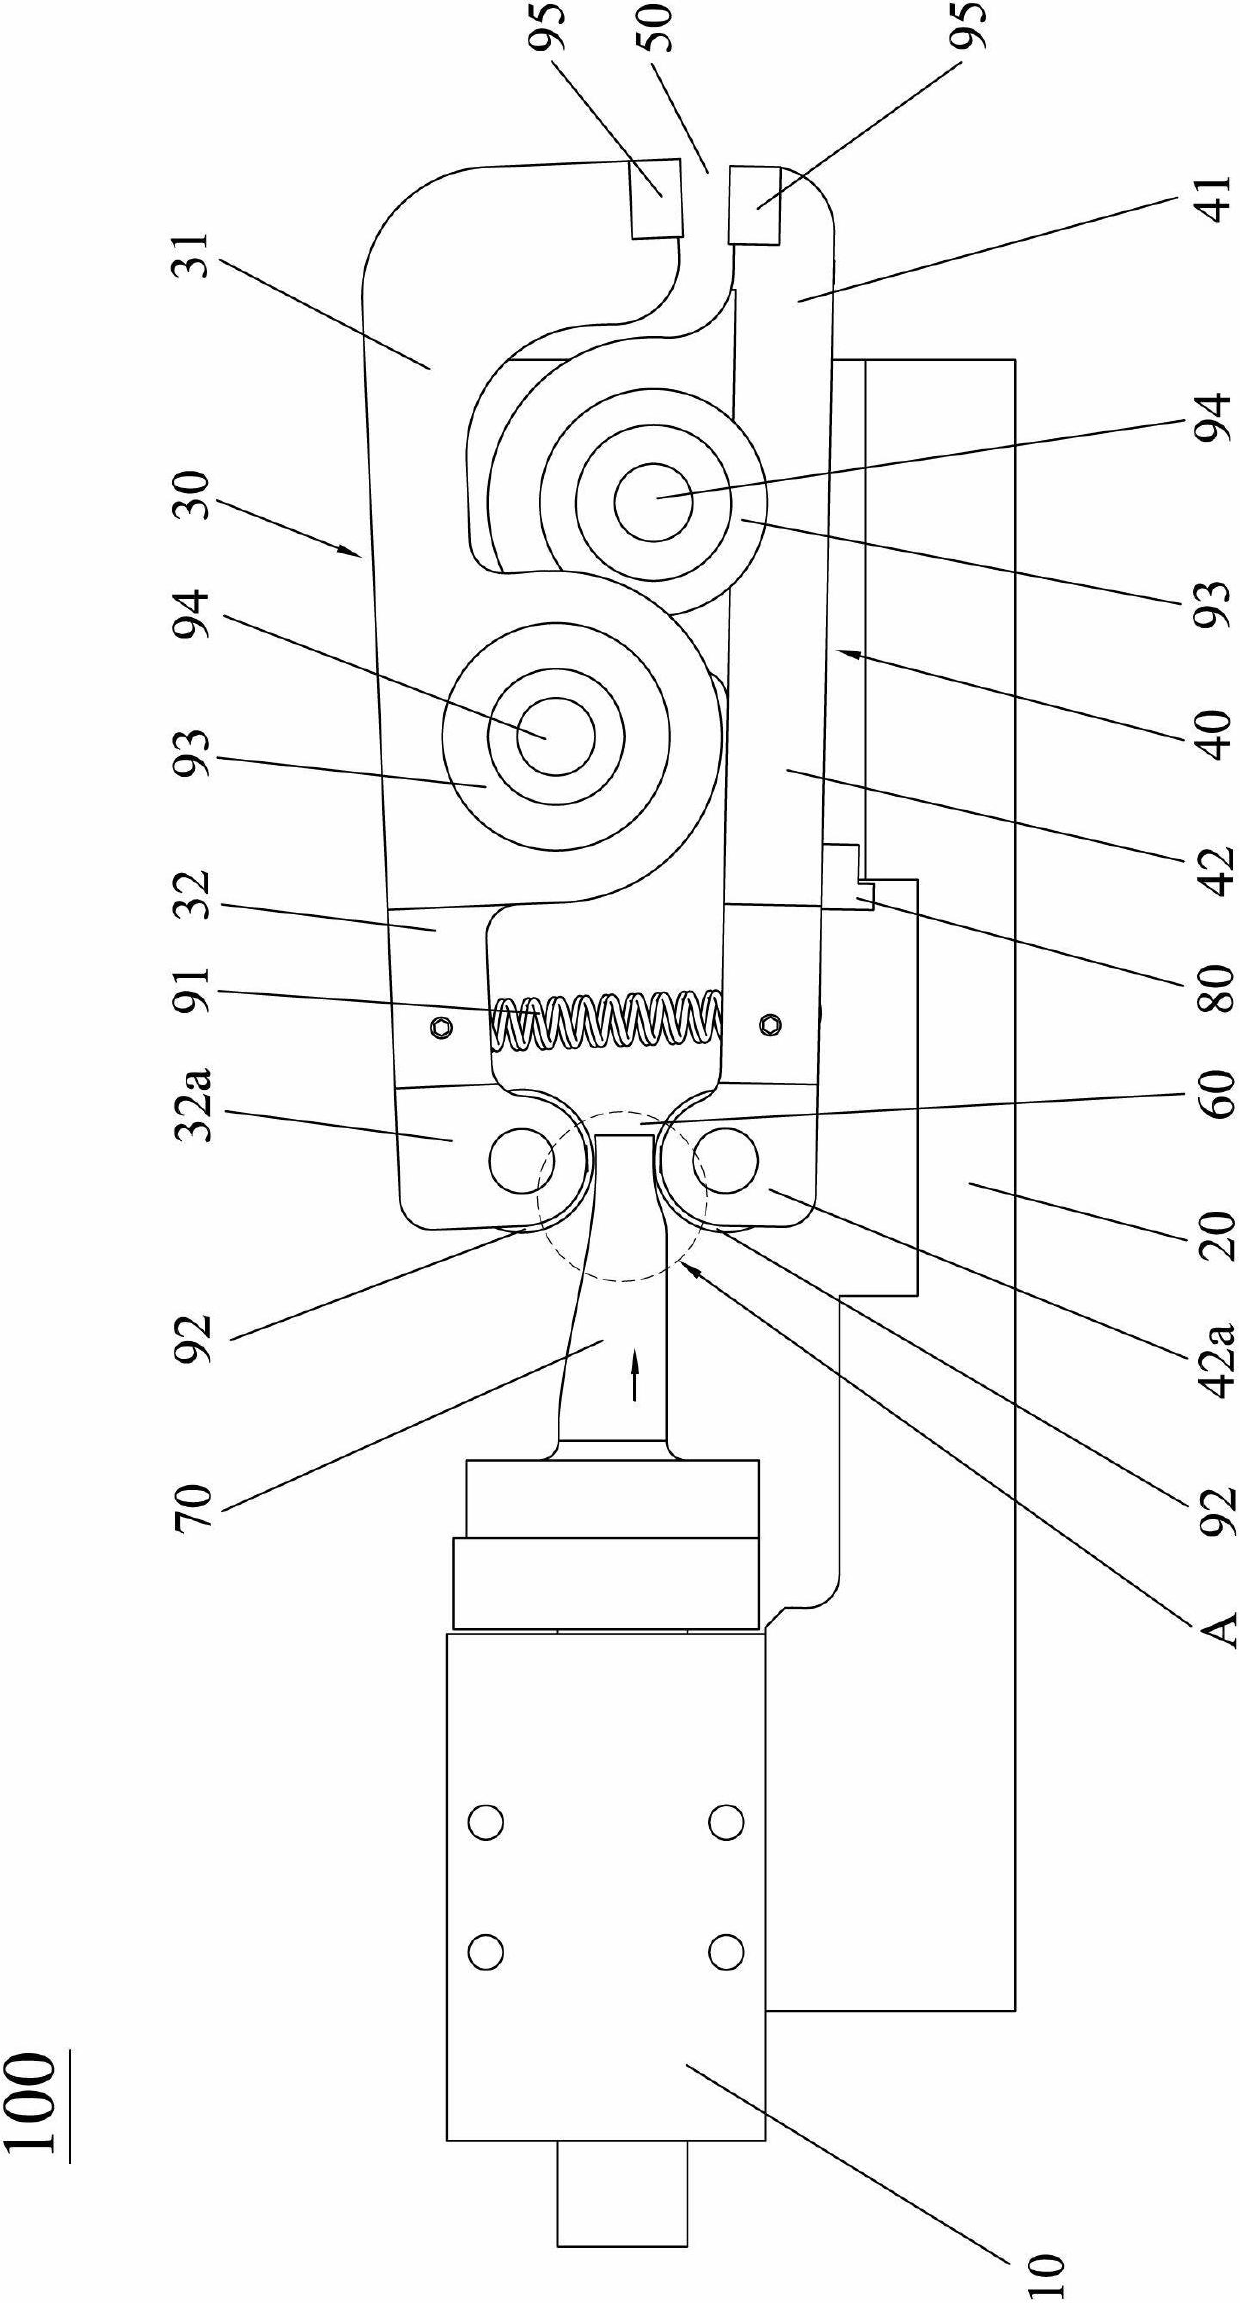 Substrate clamping device